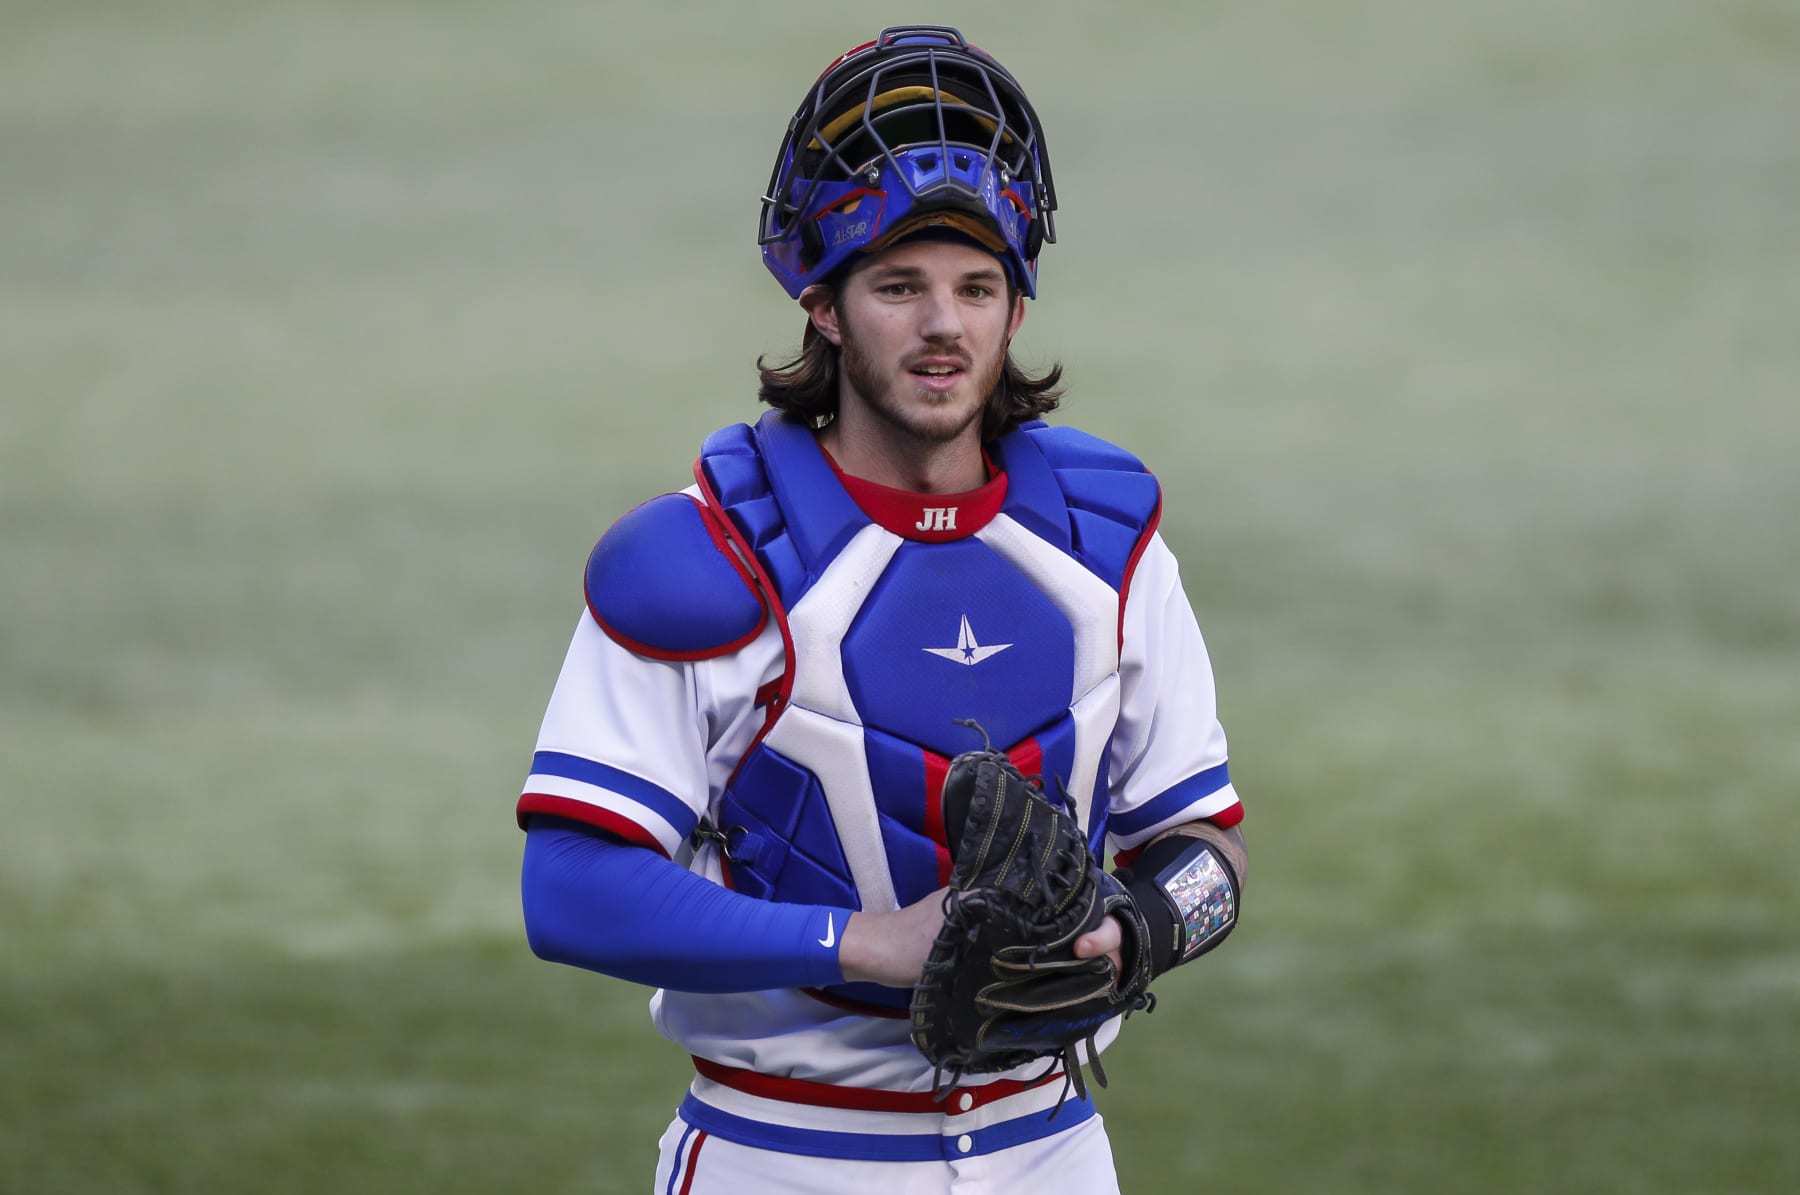 Qualified Catchers Are the Hottest New Trend of the Season